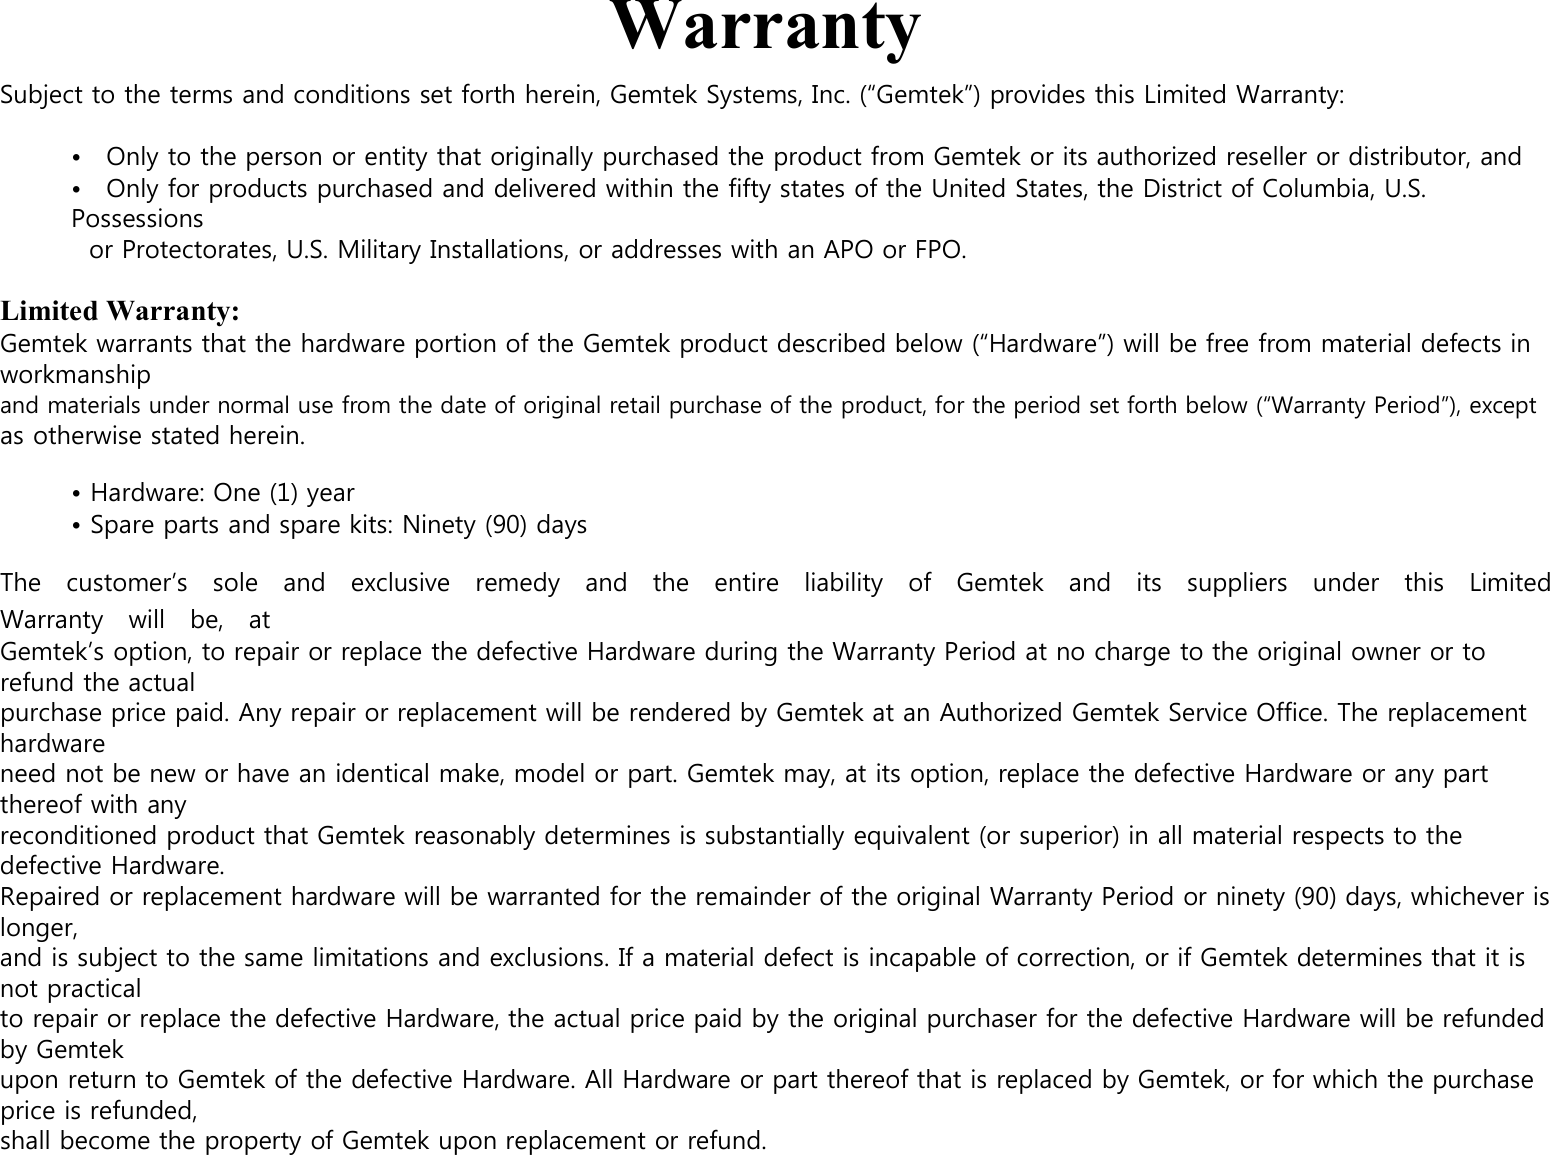  Warranty Subject to the terms and conditions set forth herein, Gemtek Systems, Inc. (“Gemtek”) provides this Limited Warranty:  •    Only to the person or entity that originally purchased the product from Gemtek or its authorized reseller or distributor, and •    Only for products purchased and delivered within the fifty states of the United States, the District of Columbia, U.S. Possessions or Protectorates, U.S. Military Installations, or addresses with an APO or FPO.  Limited Warranty: Gemtek warrants that the hardware portion of the Gemtek product described below (“Hardware”) will be free from material defects in workmanship and materials under normal use from the date of original retail purchase of the product, for the period set forth below (“Warranty Period”), except as otherwise stated herein.  • Hardware: One (1) year • Spare parts and spare kits: Ninety (90) days  The    customer’s    sole    and    exclusive    remedy    and    the    entire    liability    of    Gemtek    and    its    suppliers    under    this    Limited Warranty    will    be,    at   Gemtek’s option, to repair or replace the defective Hardware during the Warranty Period at no charge to the original owner or to refund the actual purchase price paid. Any repair or replacement will be rendered by Gemtek at an Authorized Gemtek Service Office. The replacement hardware need not be new or have an identical make, model or part. Gemtek may, at its option, replace the defective Hardware or any part thereof with any reconditioned product that Gemtek reasonably determines is substantially equivalent (or superior) in all material respects to the defective Hardware. Repaired or replacement hardware will be warranted for the remainder of the original Warranty Period or ninety (90) days, whichever is longer, and is subject to the same limitations and exclusions. If a material defect is incapable of correction, or if Gemtek determines that it is not practical to repair or replace the defective Hardware, the actual price paid by the original purchaser for the defective Hardware will be refunded by Gemtek upon return to Gemtek of the defective Hardware. All Hardware or part thereof that is replaced by Gemtek, or for which the purchase price is refunded, shall become the property of Gemtek upon replacement or refund.  